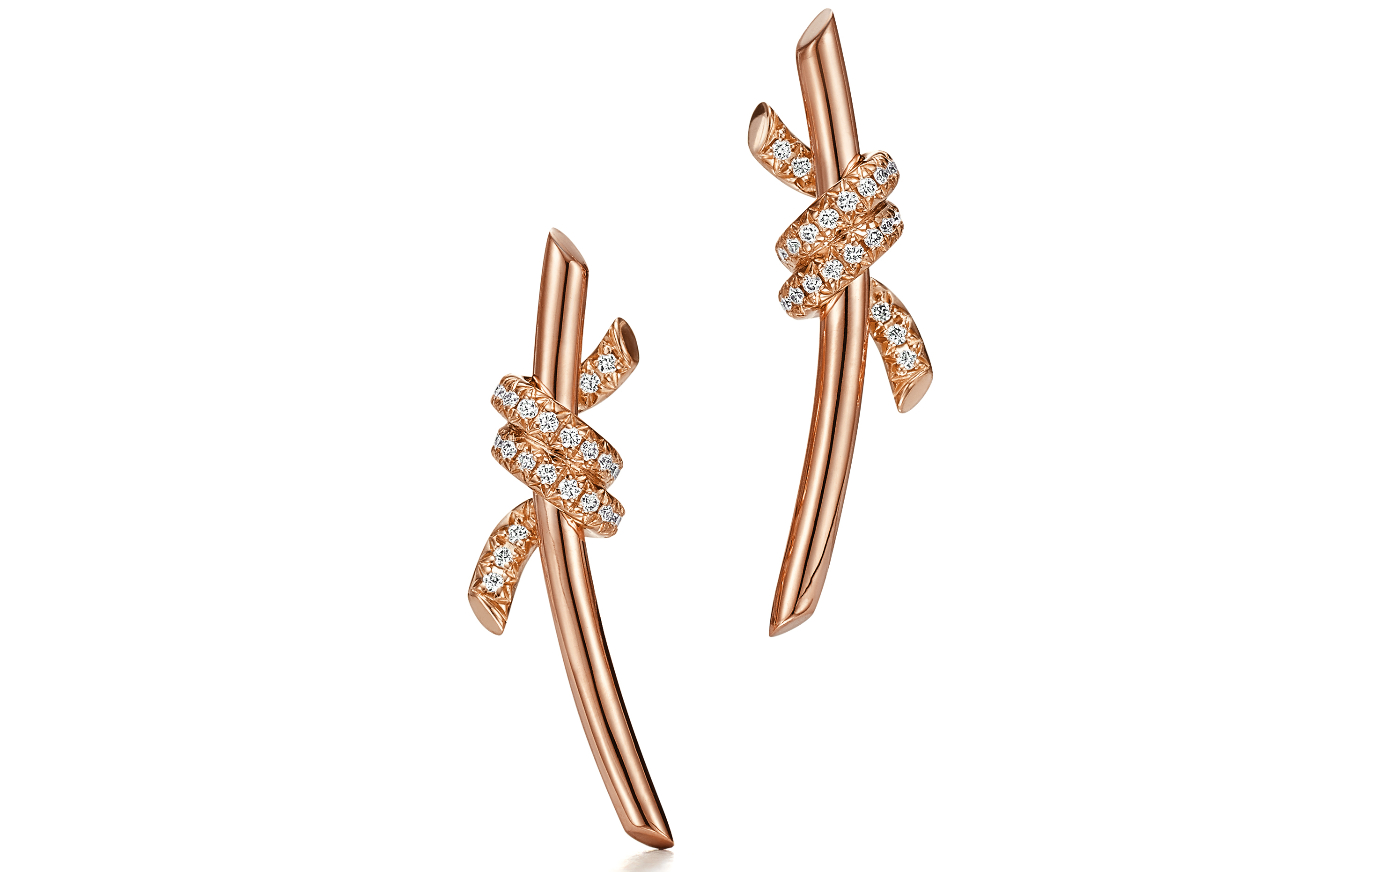 Tiffany & Co. launches the new Tiffany Knot Collection